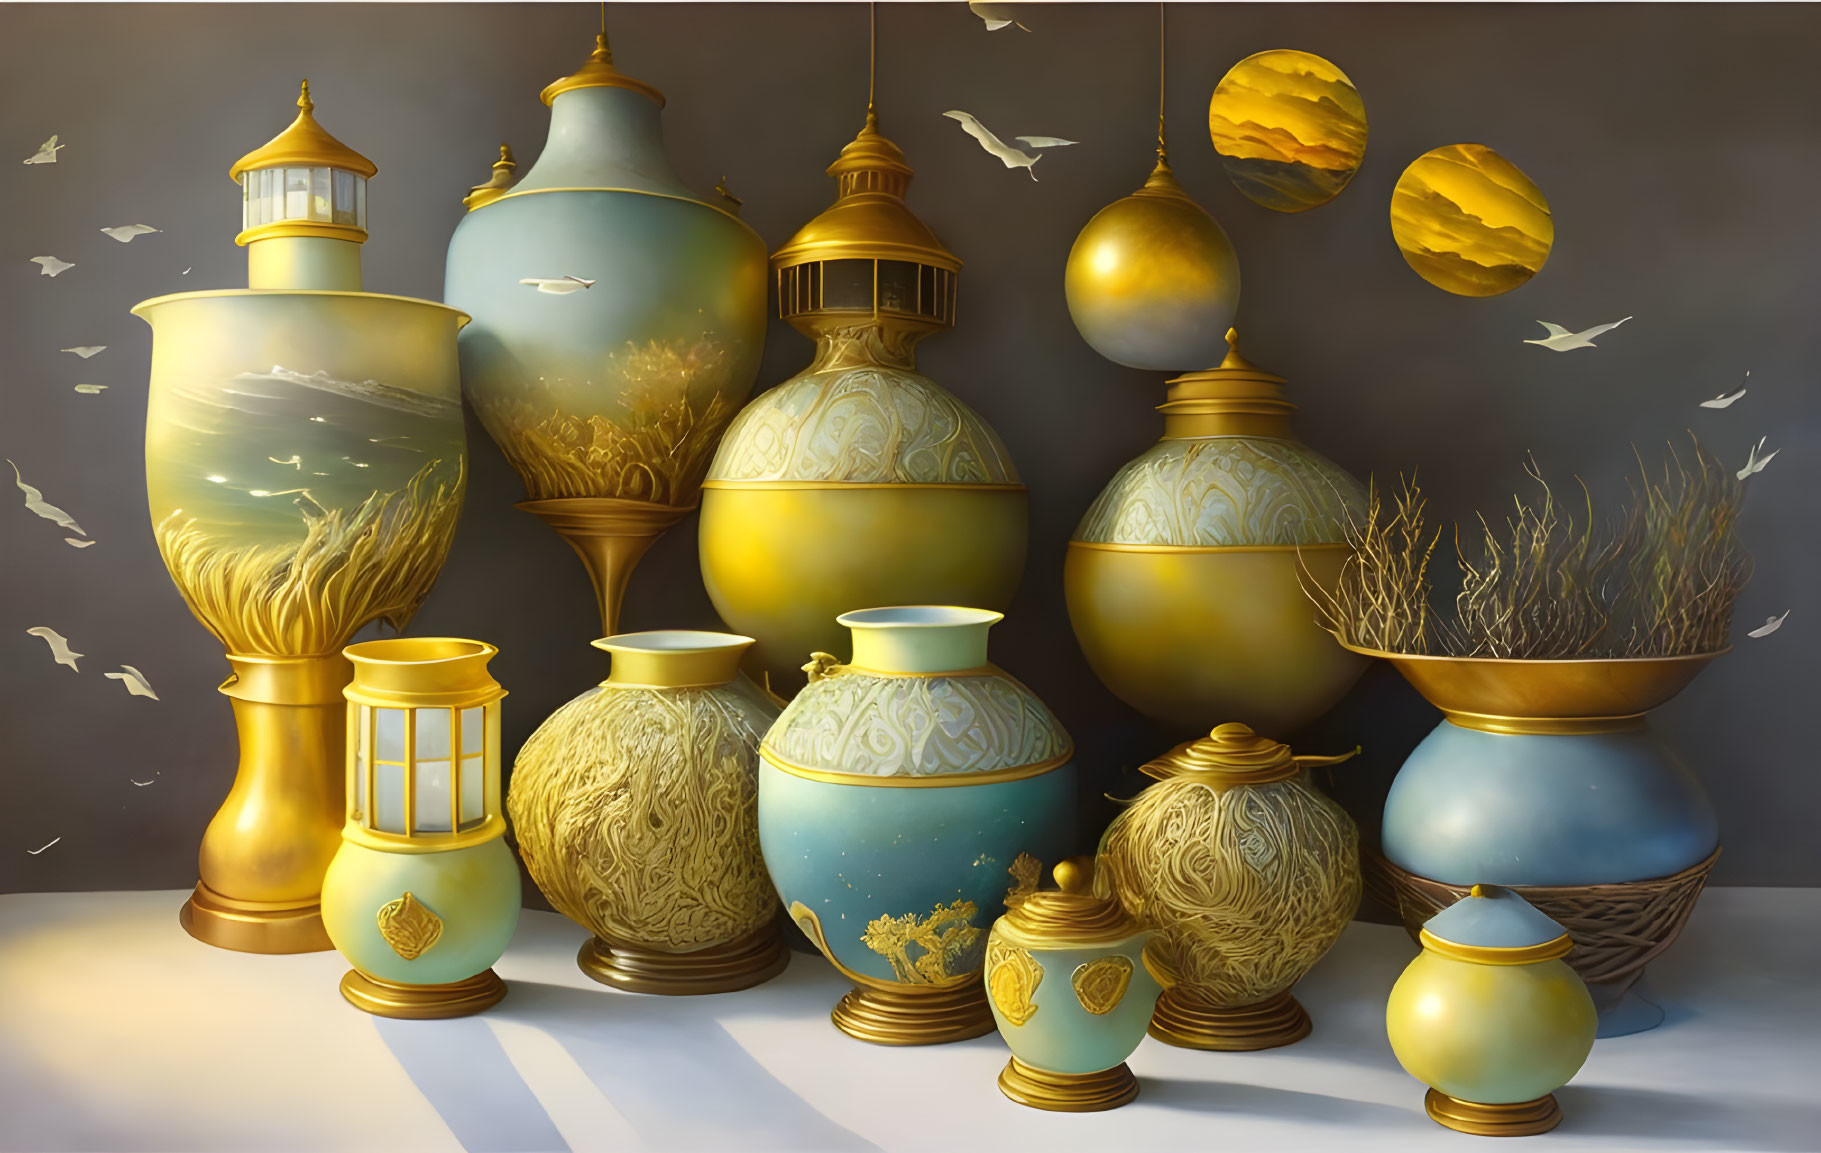 Elegant pots and lanterns with golden designs amid floating orbs and birds